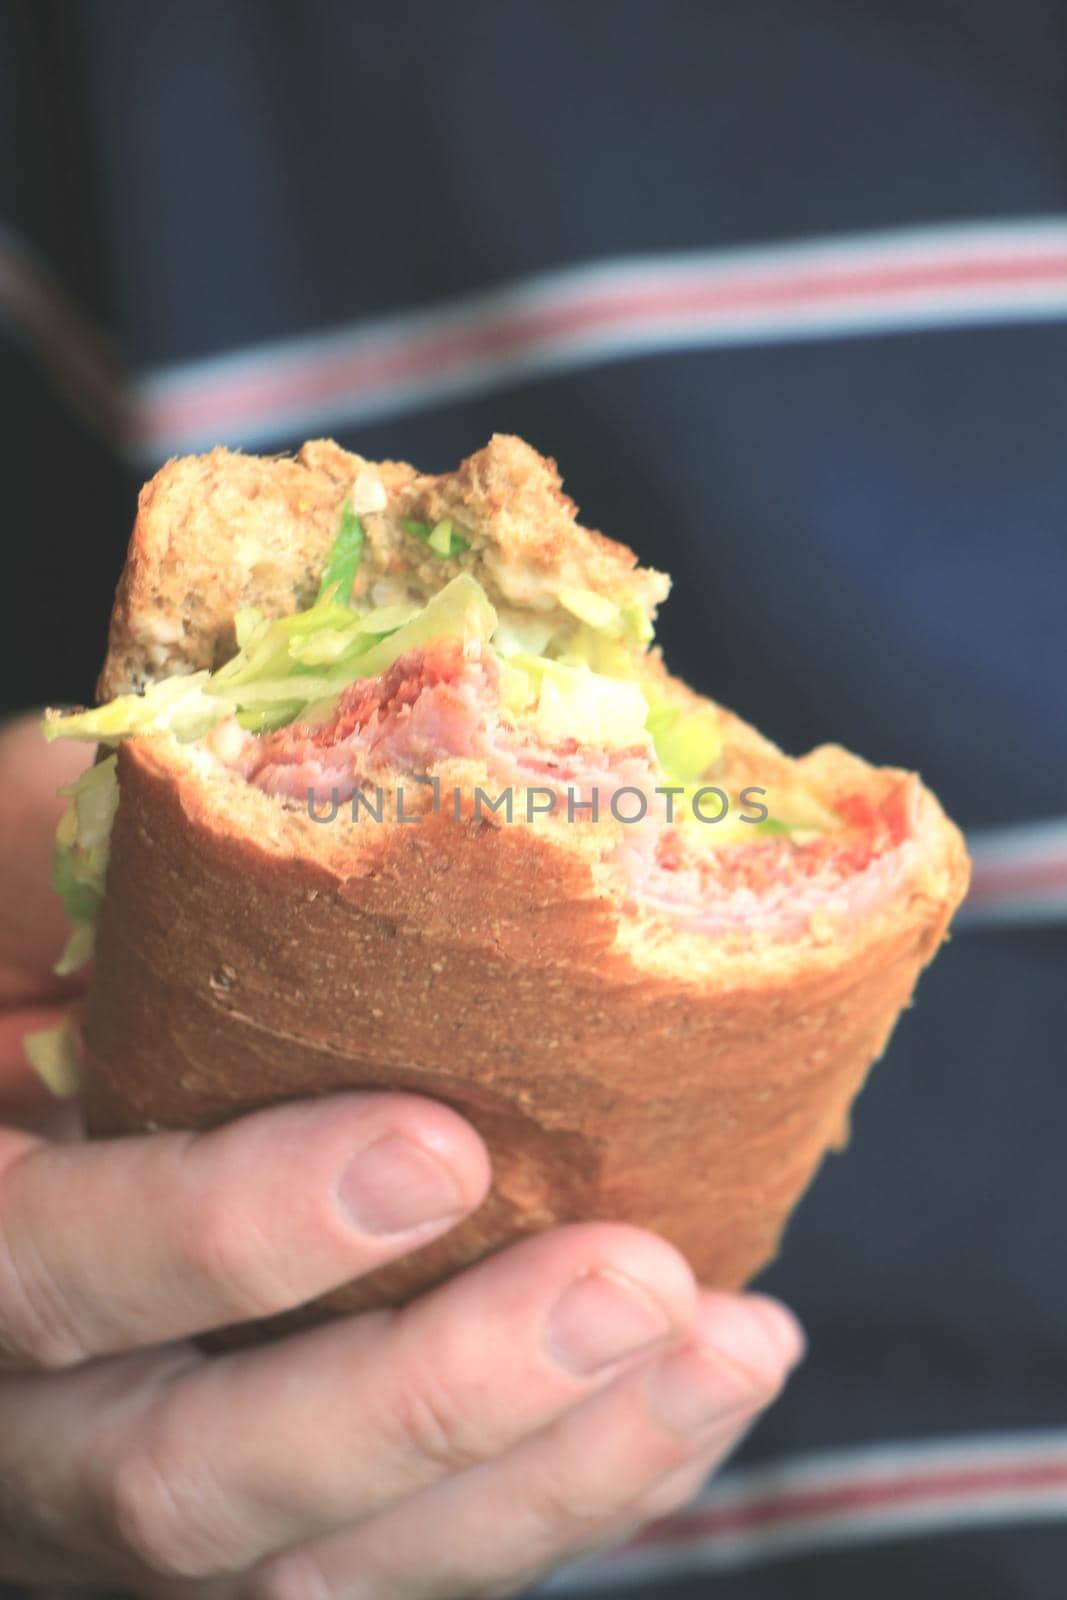 Man holding a fresh made sandwich with lettuce, cold cuts, vegetables and cheese